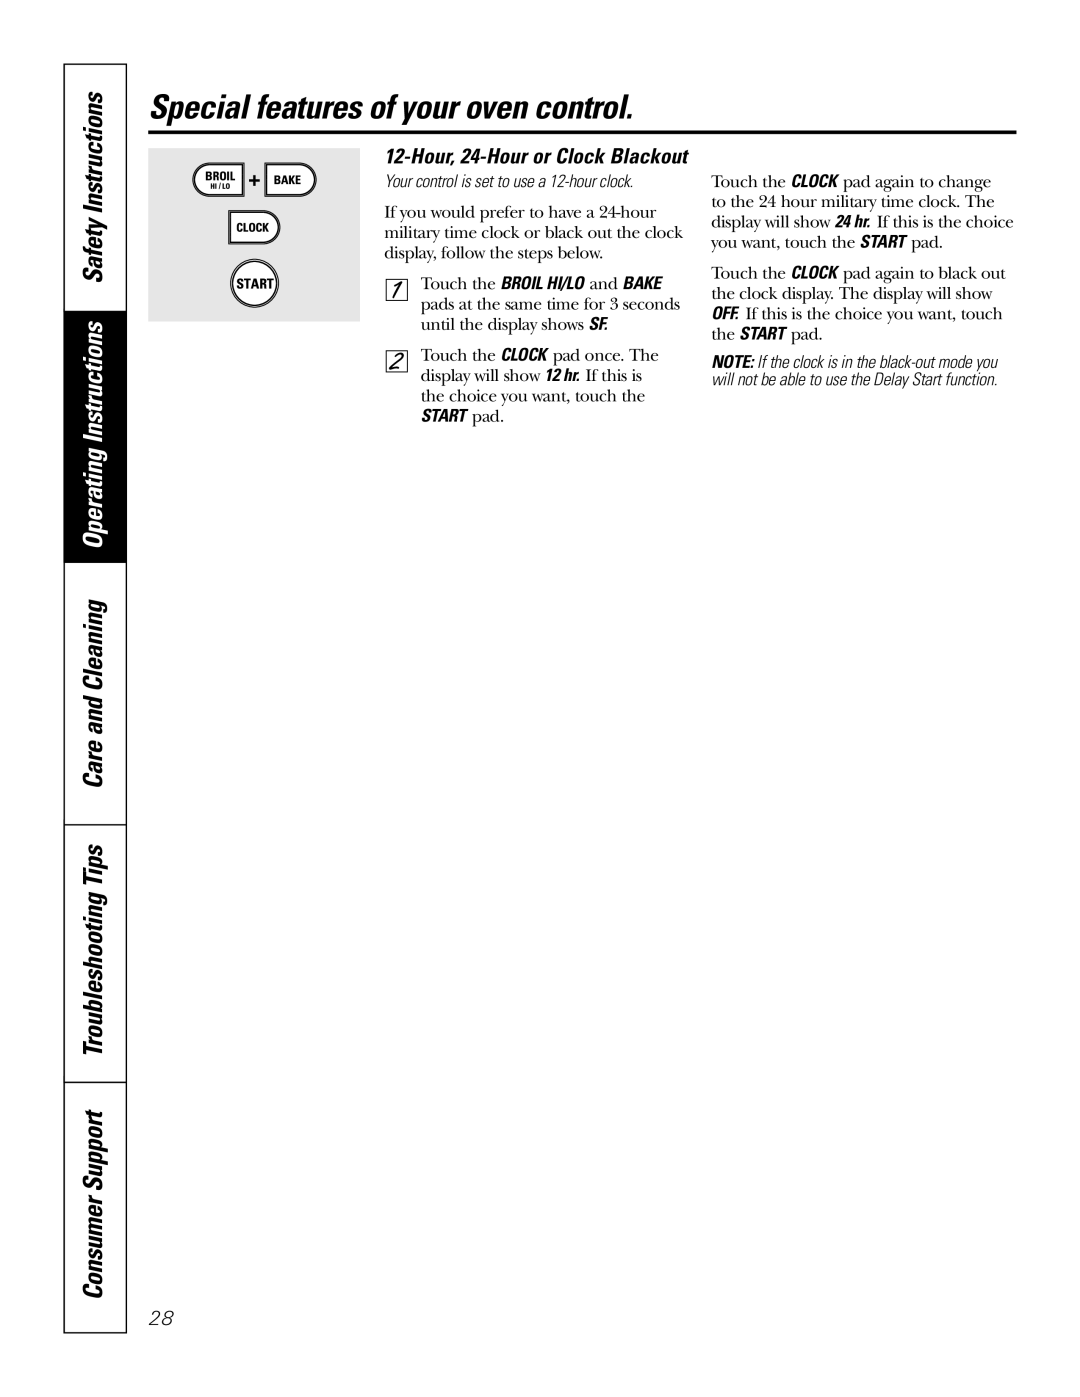 GE PGS968 owner manual Special features of your oven control, Hour, 24-Houror Clock Blackout 